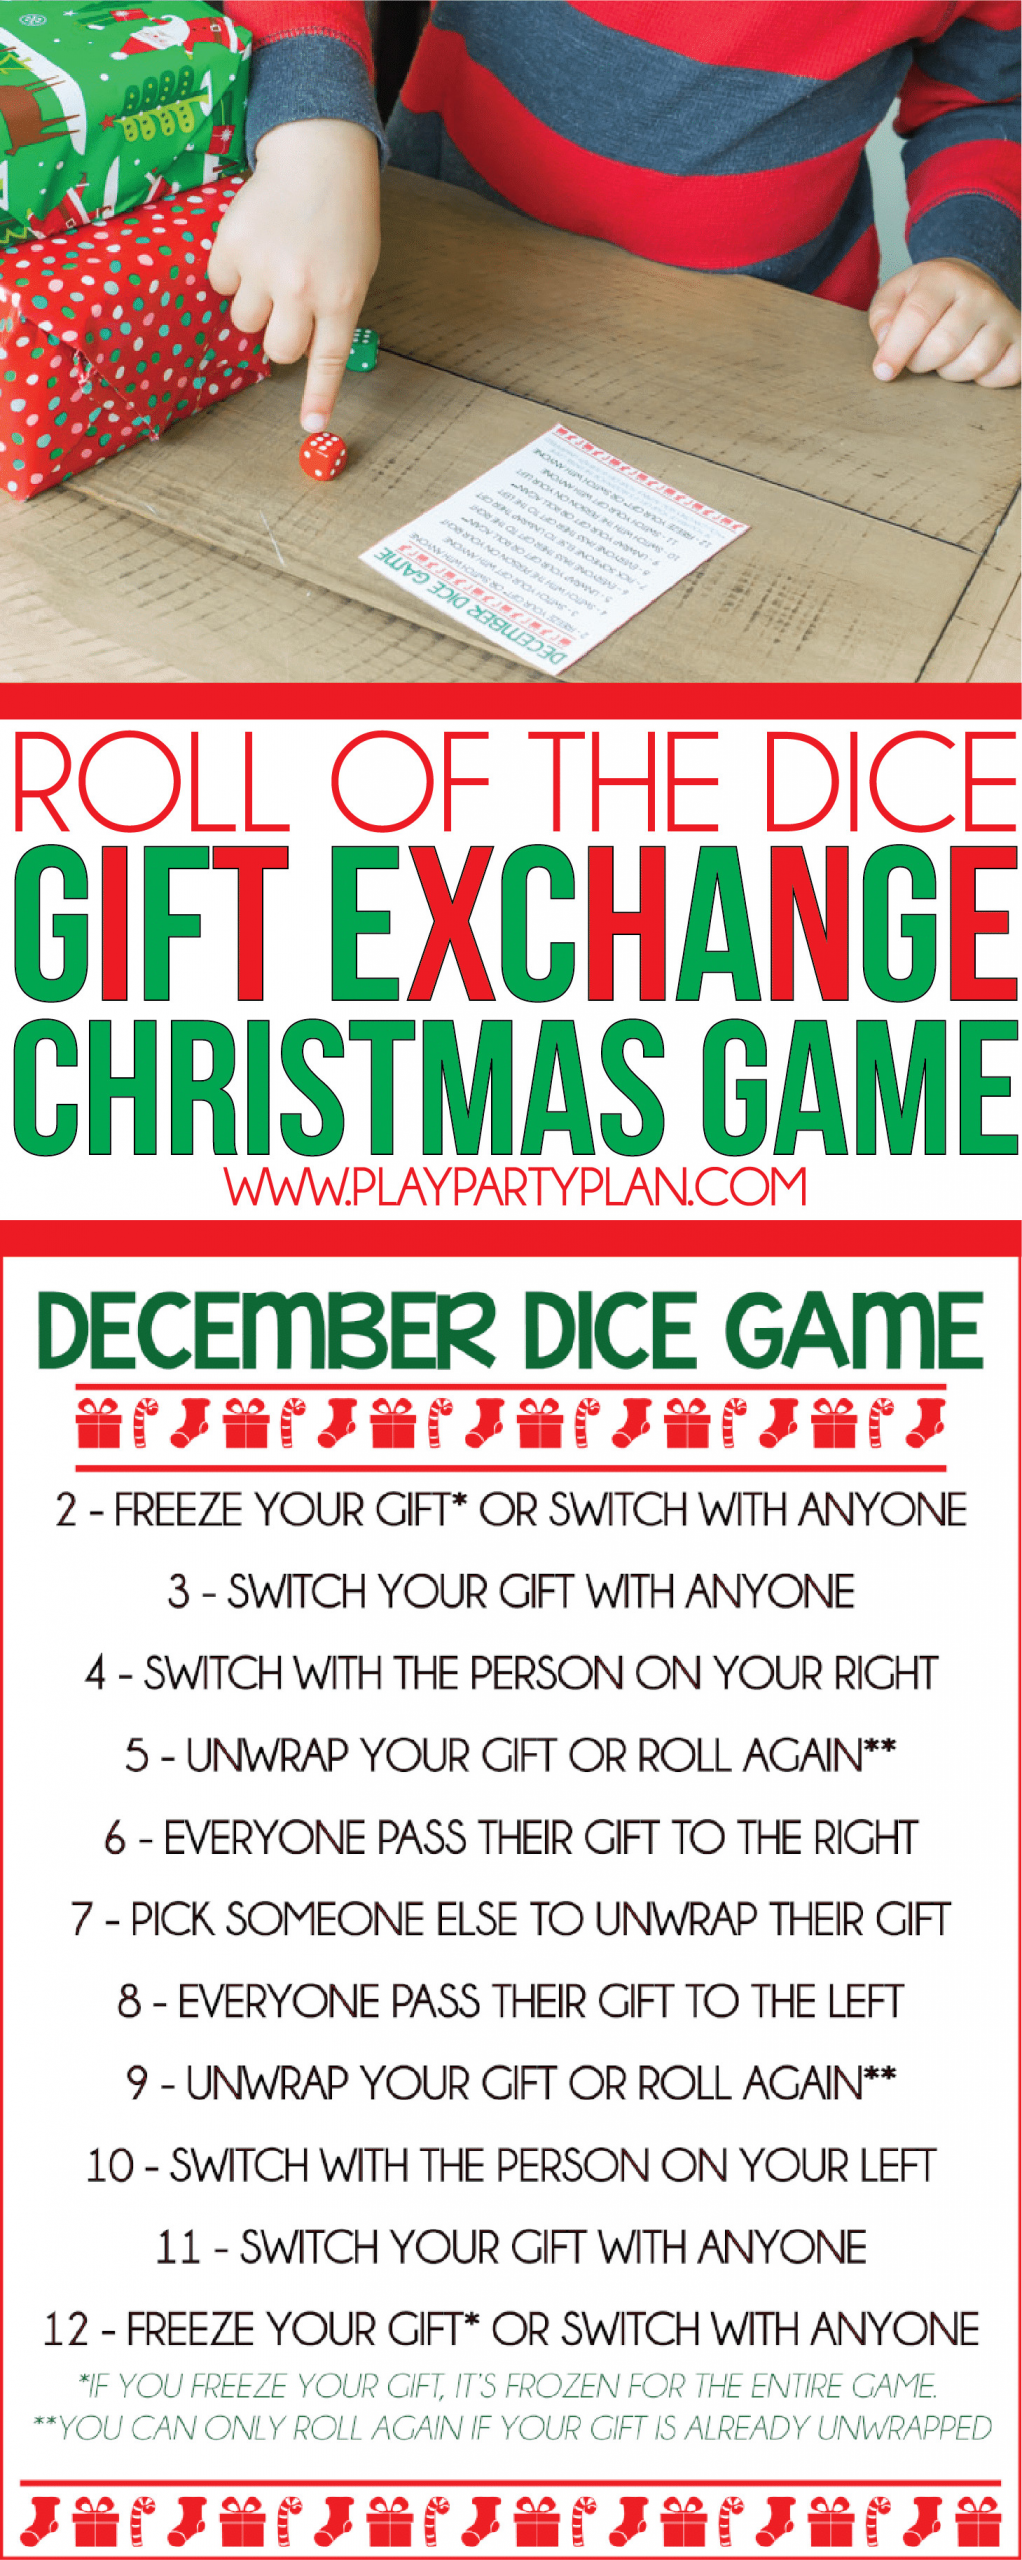 Holiday Gift Exchange Games Ideas
 11 Fun & Creative Gift Exchange Games You Have to Try